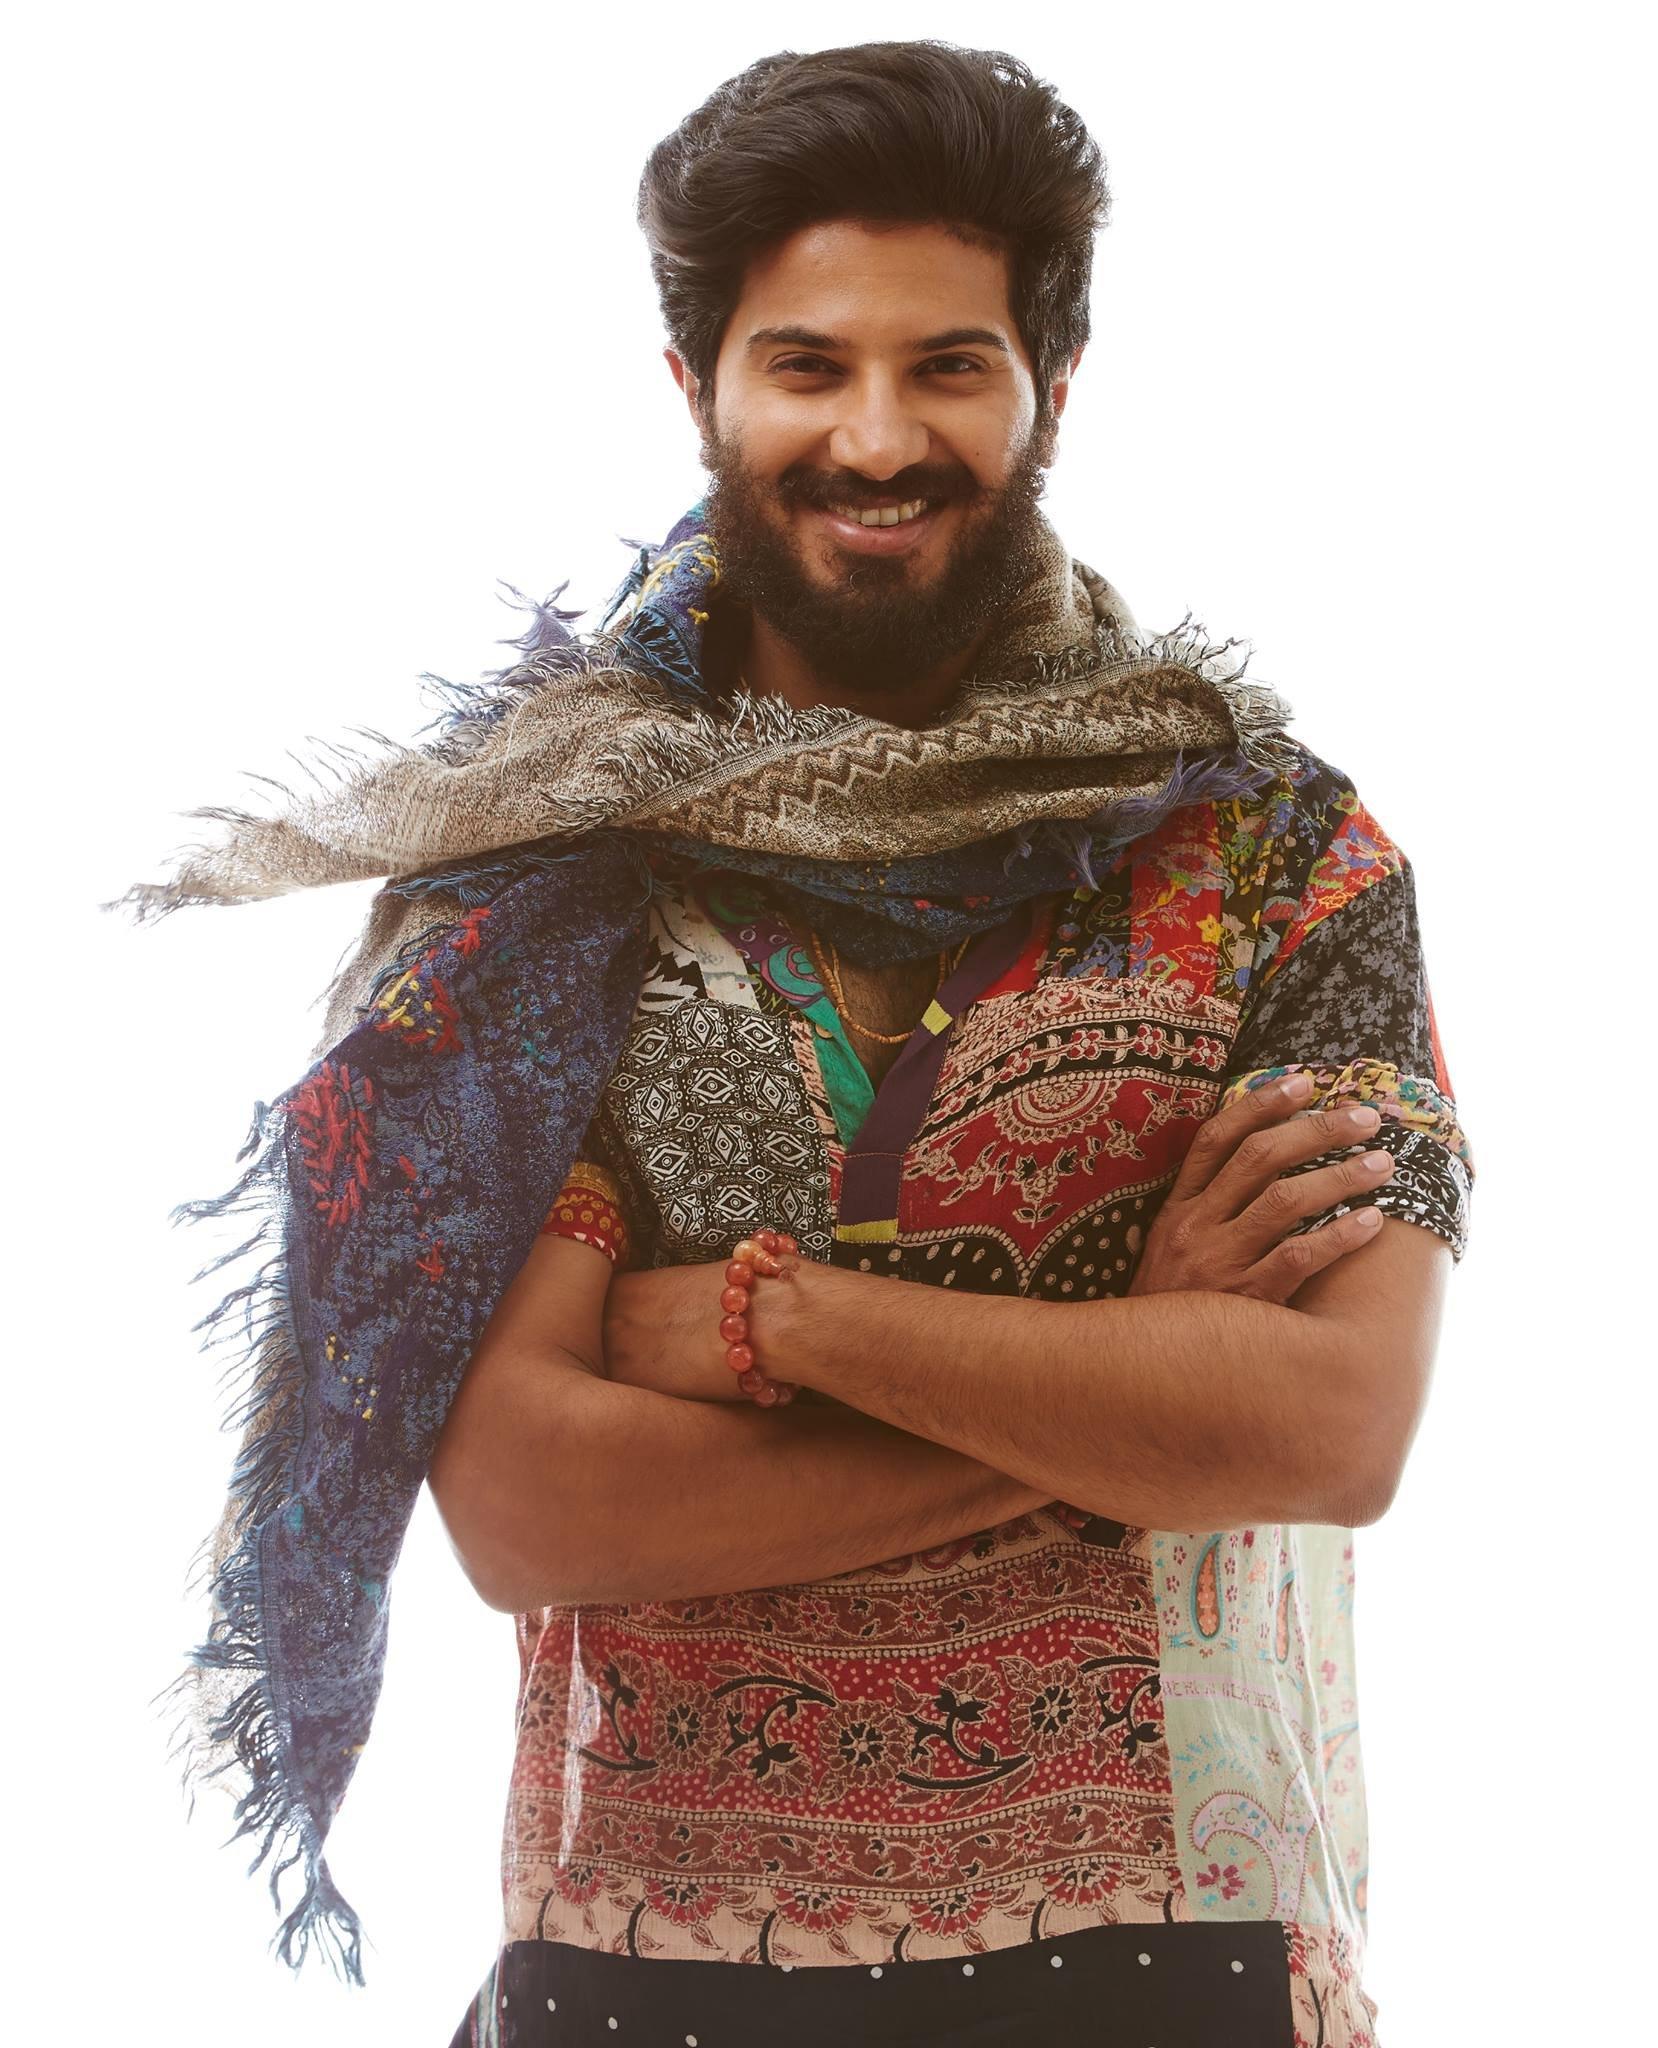 Dulquer Salmaan Wallpaper HD For Android Apk